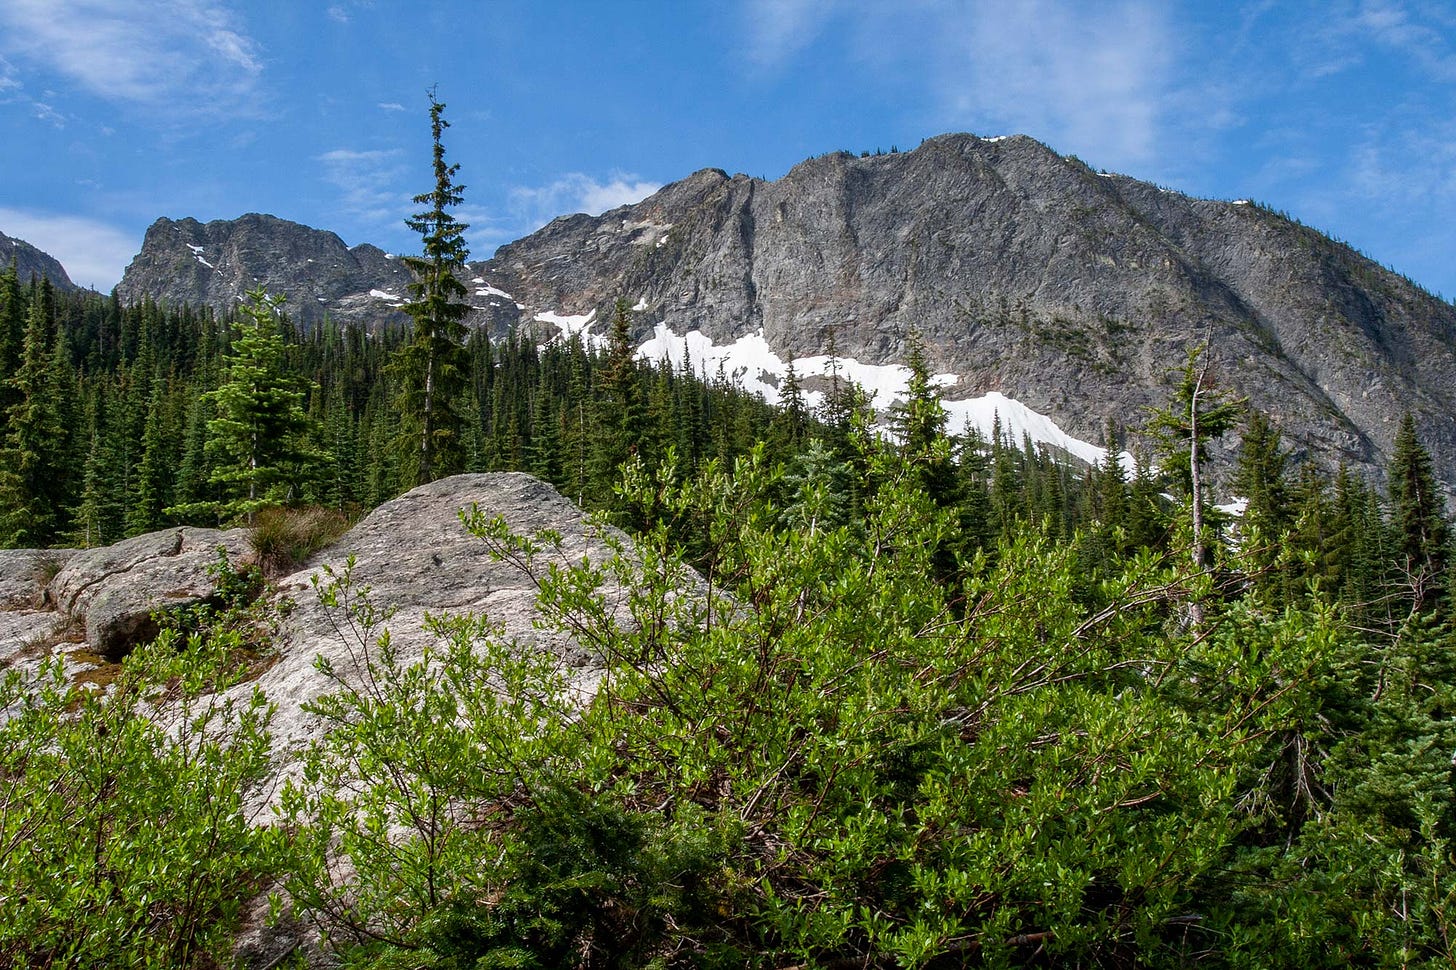 rocky peak with lingering snow at the base behind a slope of conifers and a large gray low boulder and bright green shrubs